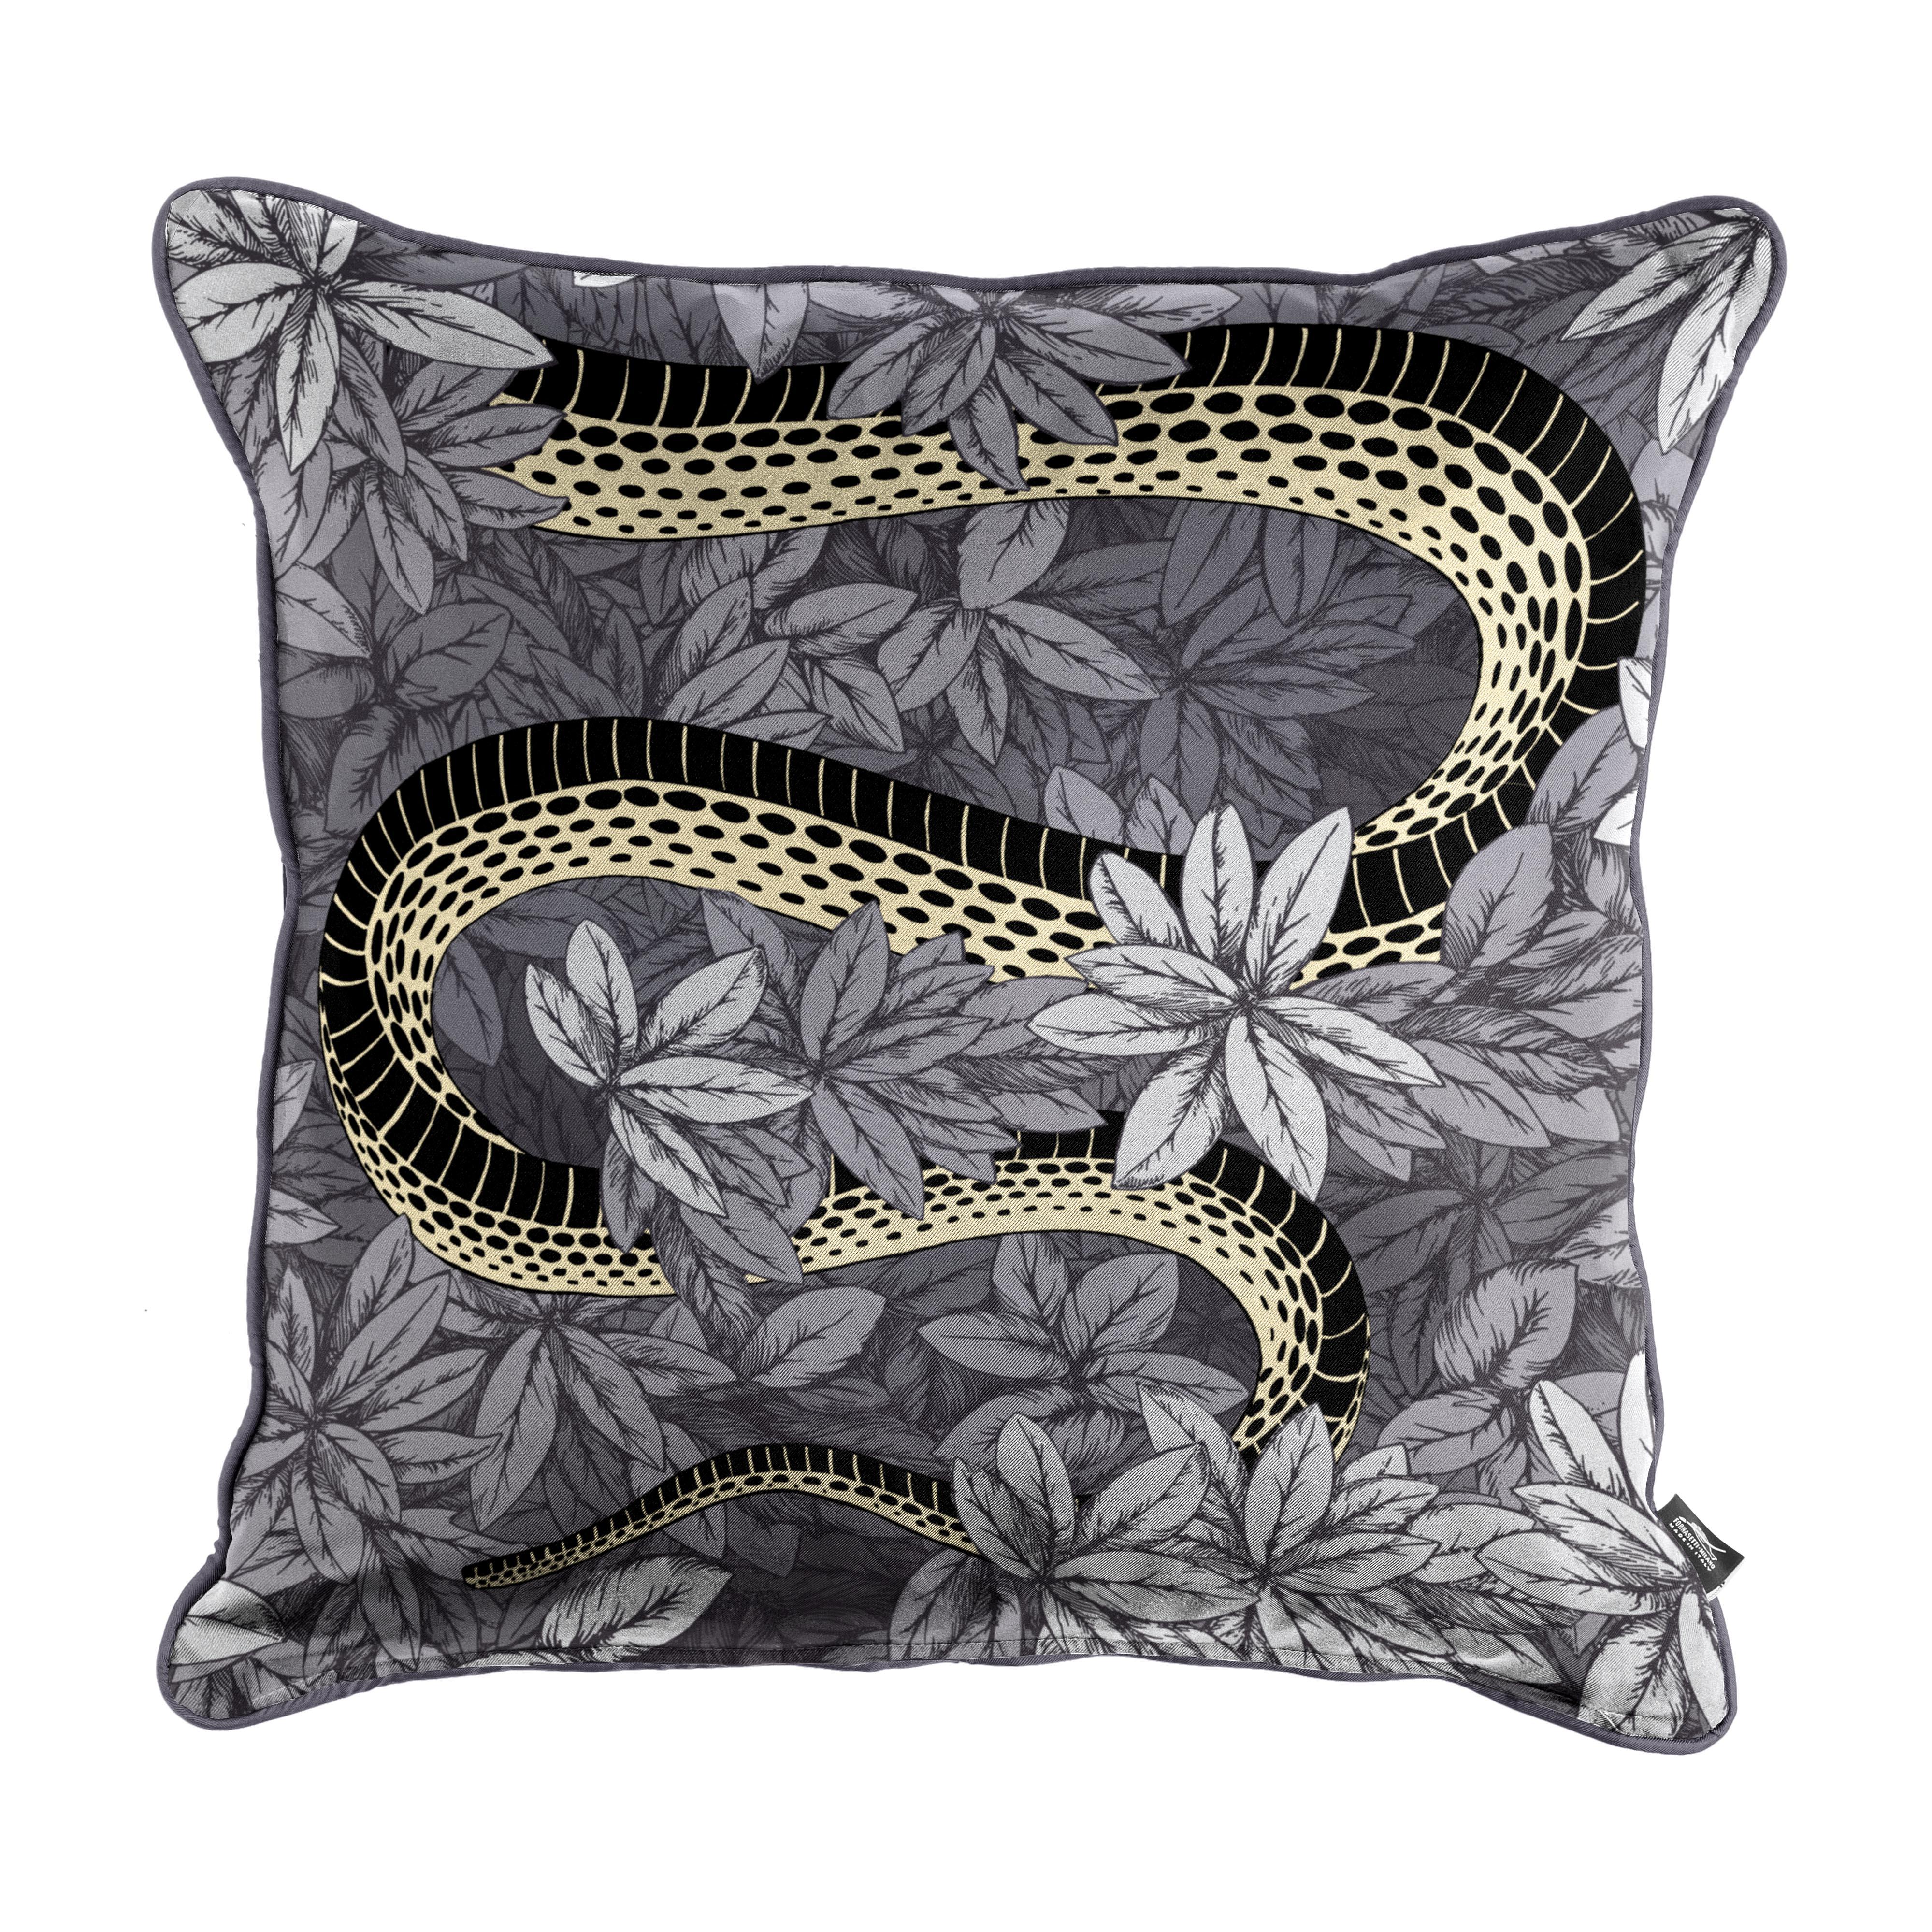 The Fornasetti cushions will add to each room an unexpected detail thanks to the most iconic Italian atelier designs. 

The decoration features a snake holding the forbidden fruit in its jaws, and surrounded by hand painted leaves. It is inspired